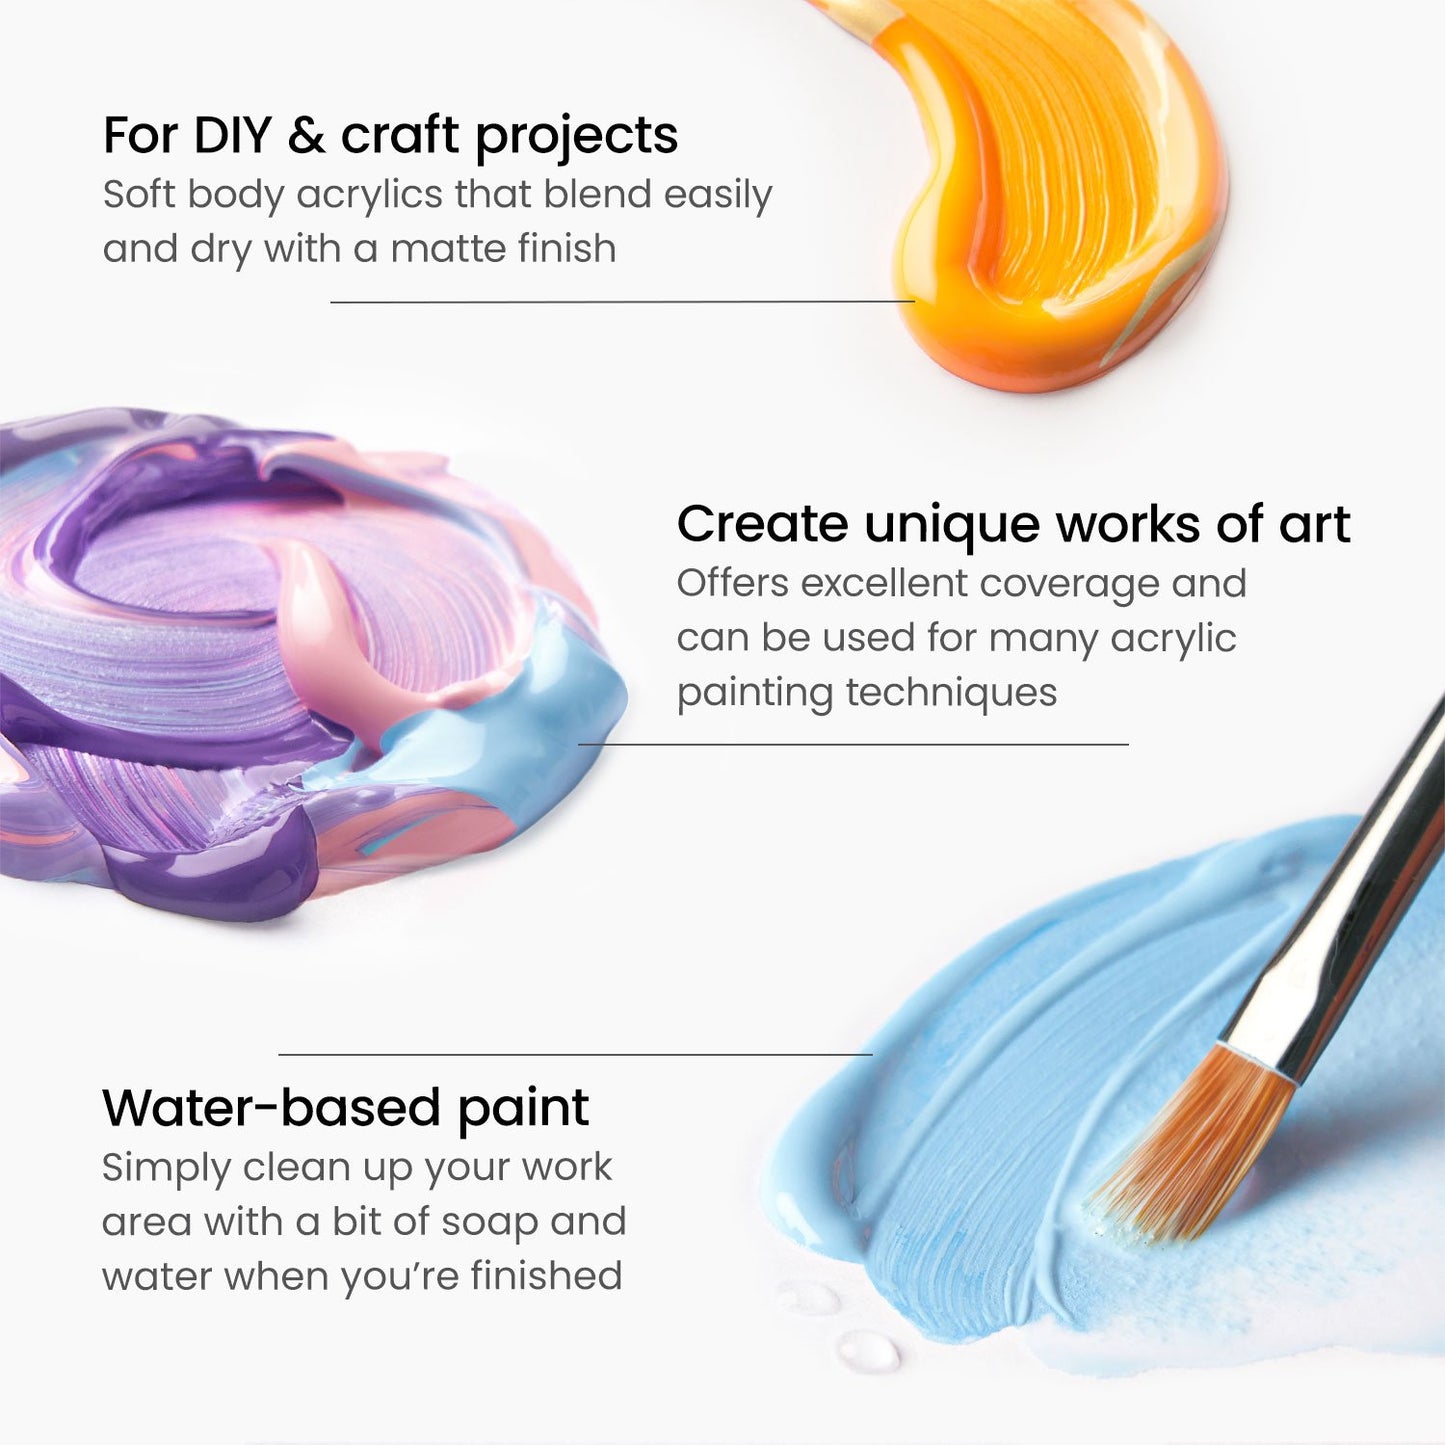 ACRYLIC PAINT - MAT, Acrylic paints, PAINTS - Acrylic paints, ACRYLIC PAINT  - MAT, Acrylic paints are water-based quick-drying paints, with good  coverage and easy to use. They can be applied